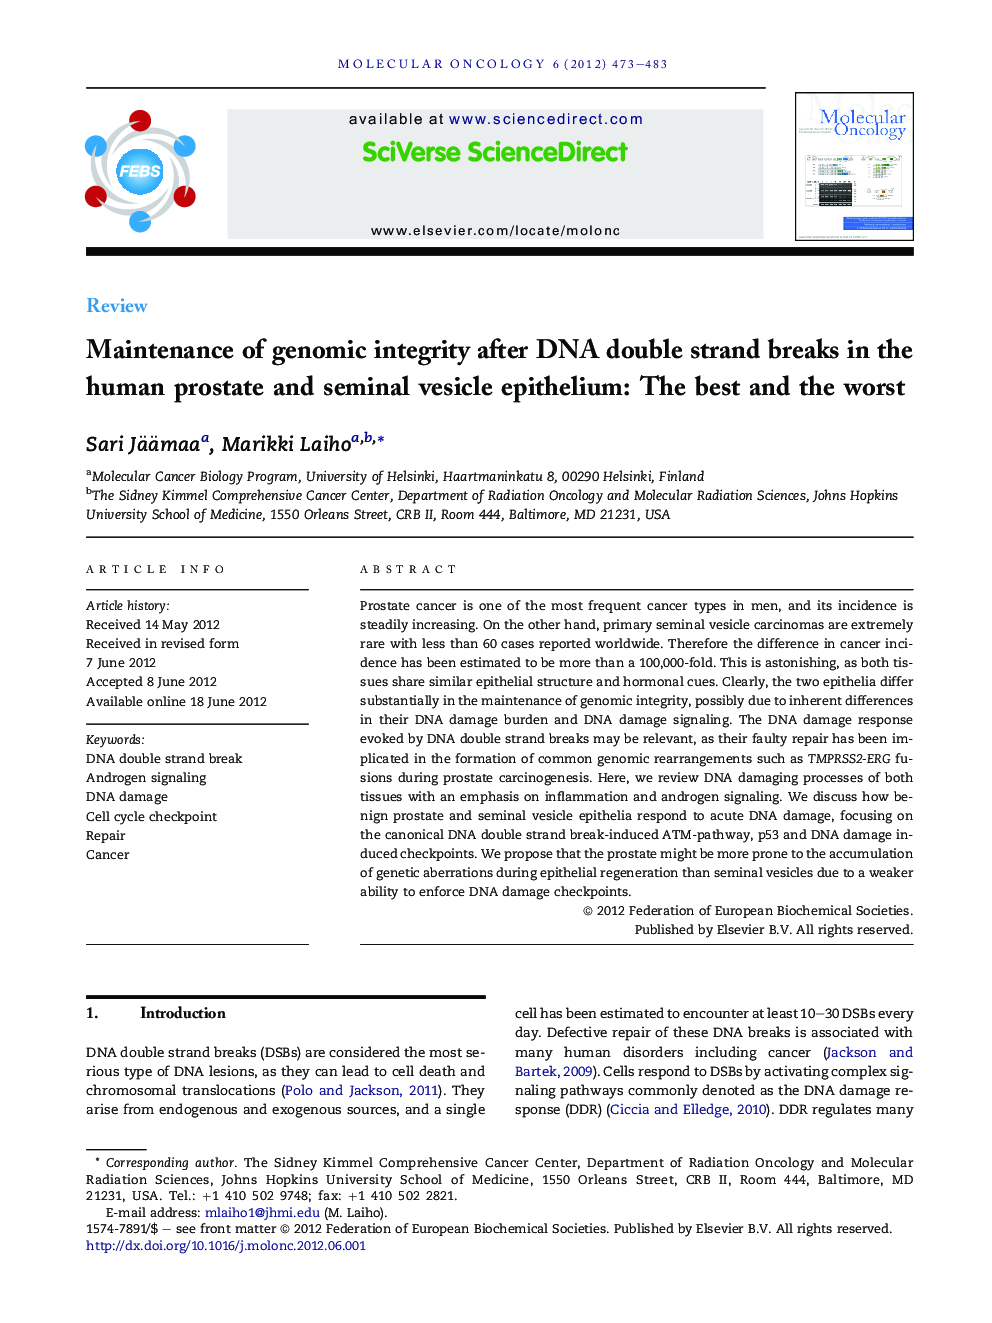 Maintenance of genomic integrity after DNA double strand breaks in the human prostate and seminal vesicle epithelium: The best and the worst